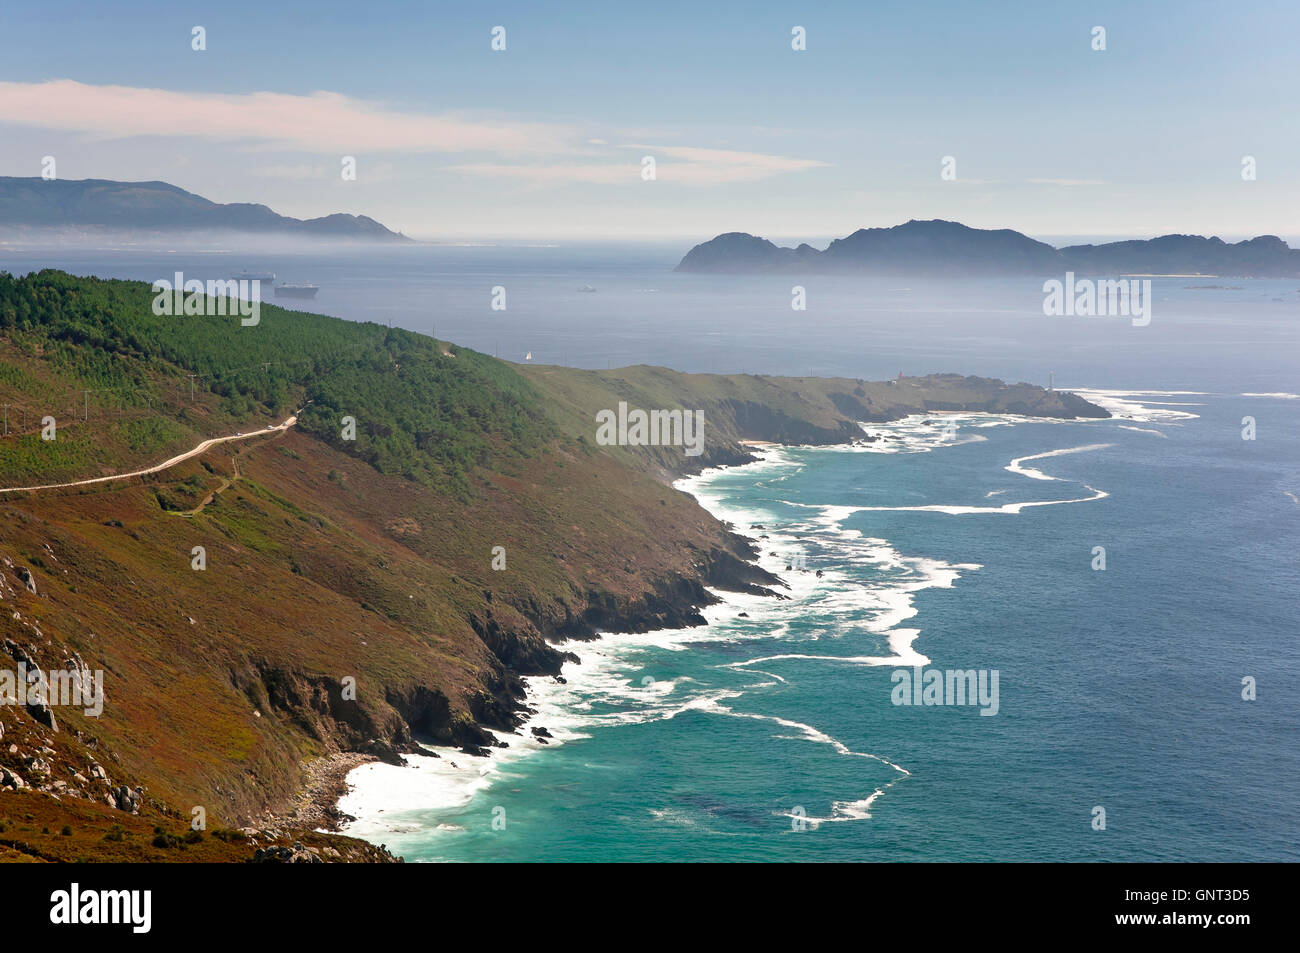 Panoramic view of the Cape Home with fog, Donon, Pontevedra province, Region of Galicia, Spain, Europe Stock Photo